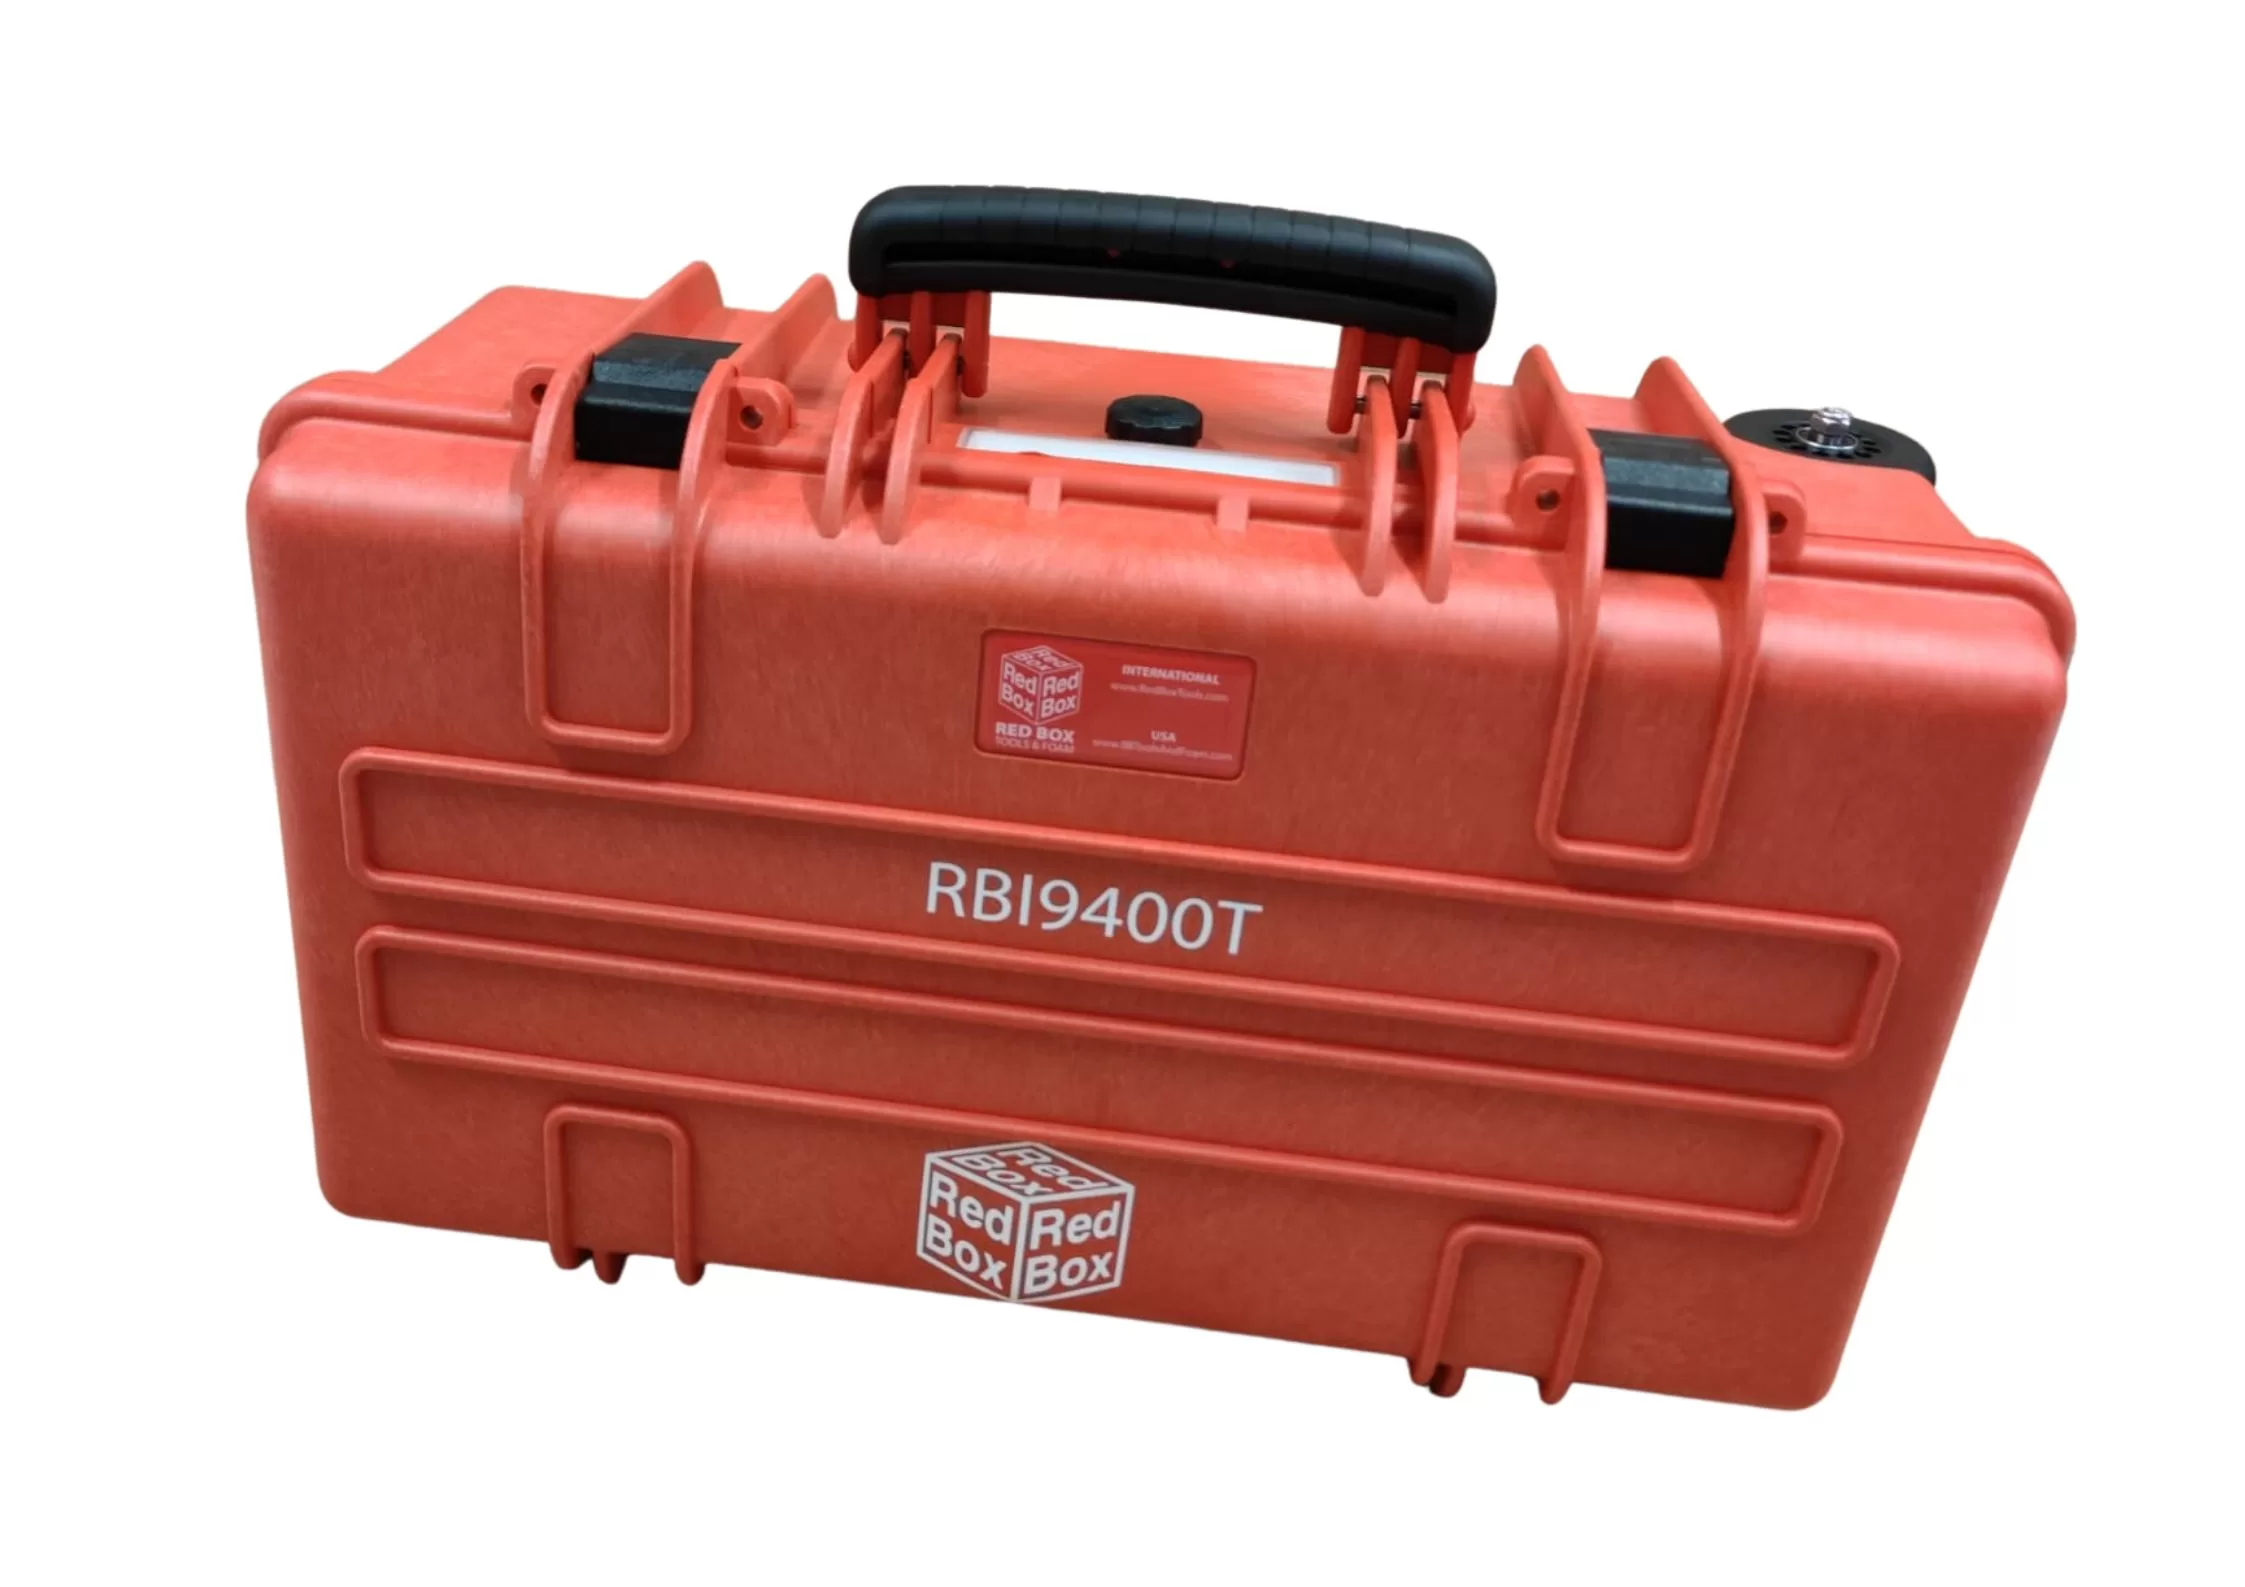 RBA24 Auto Repair Small Tool Chest – Includes 138 Metric Tools - Red Box  Tools & Foams